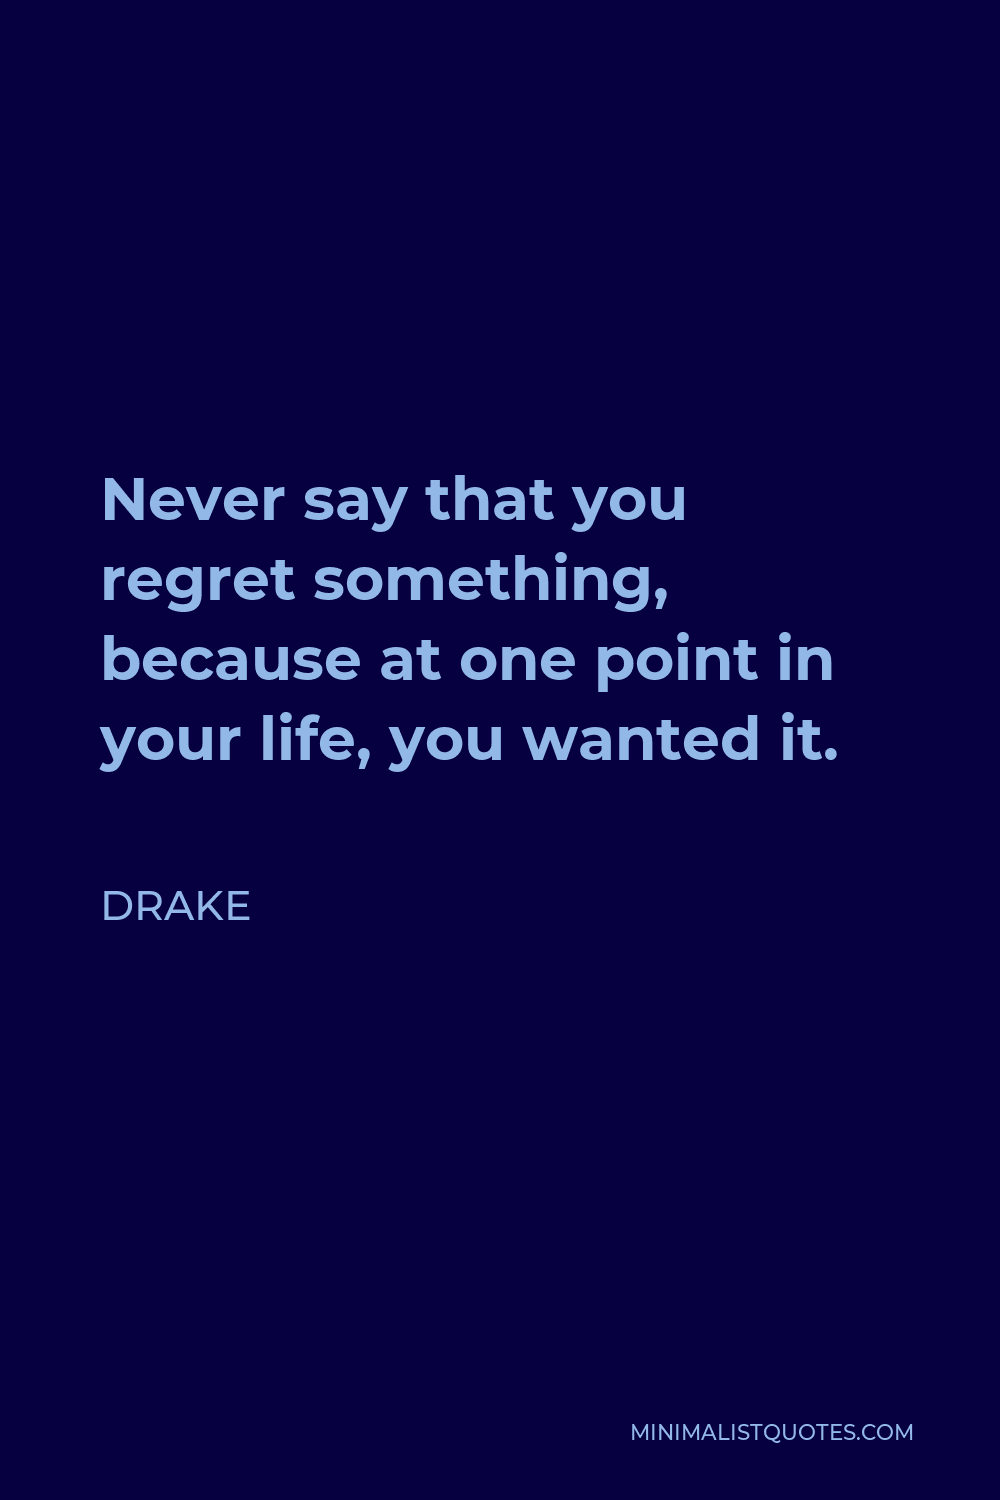 Drake Quote - Never say that you regret something, because at one point in your life, you wanted it.